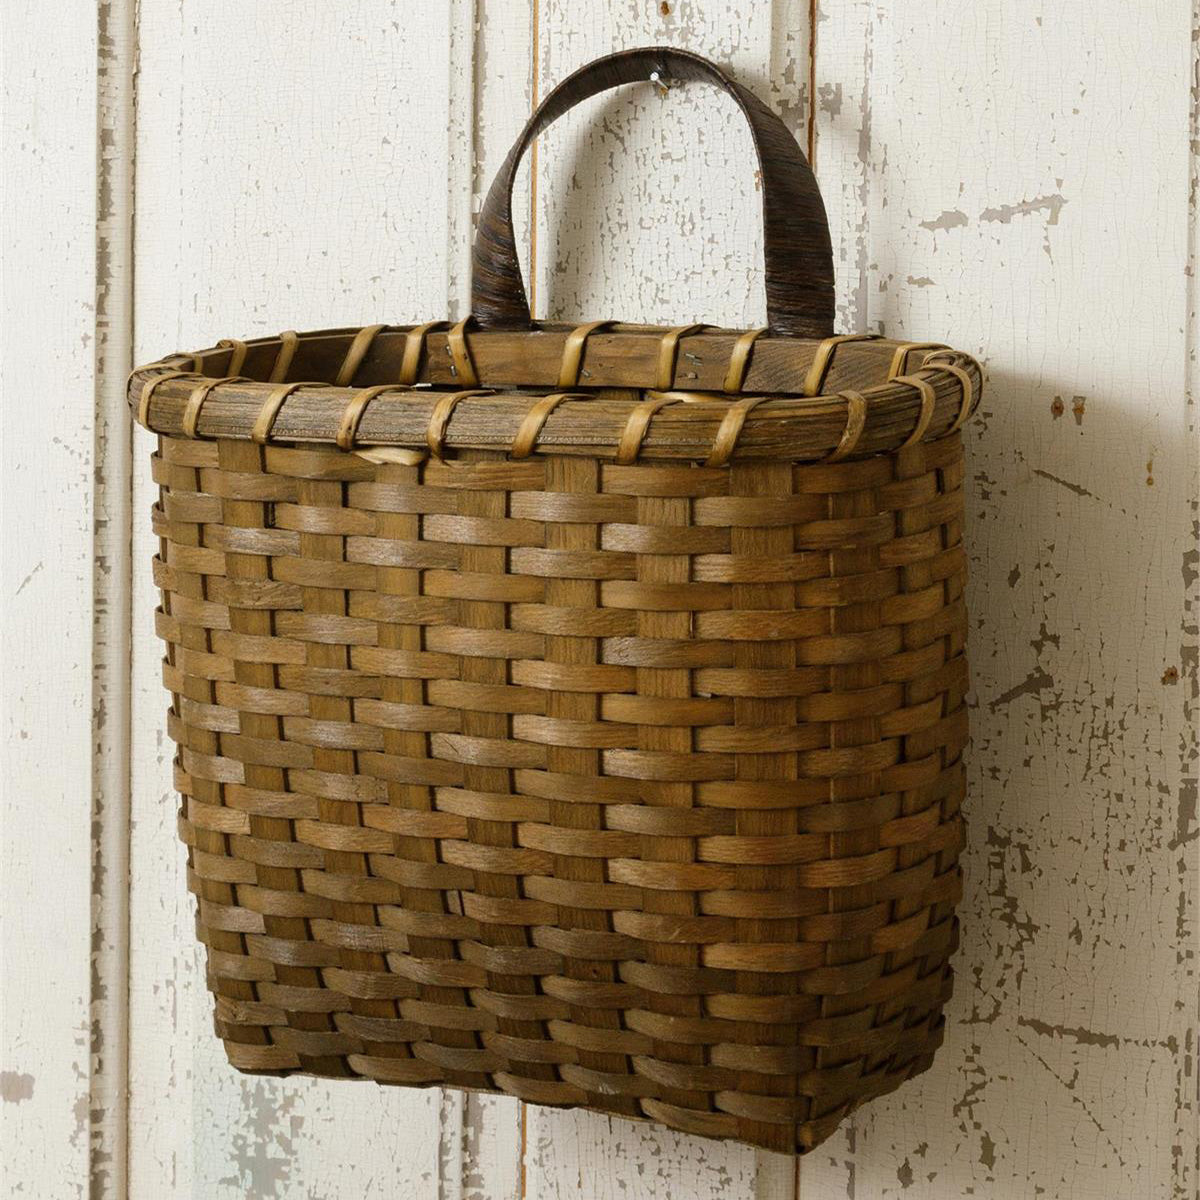 The Shaker Style Wall Basket is a woven chipwood basket with a deep brown finish. Add instant farmhouse charm with this large wall basket. It is perfect for displaying winter greens, summer florals, mail, and decorative fillers. Measures 12.50"L x 7.75"deep x 15"H.